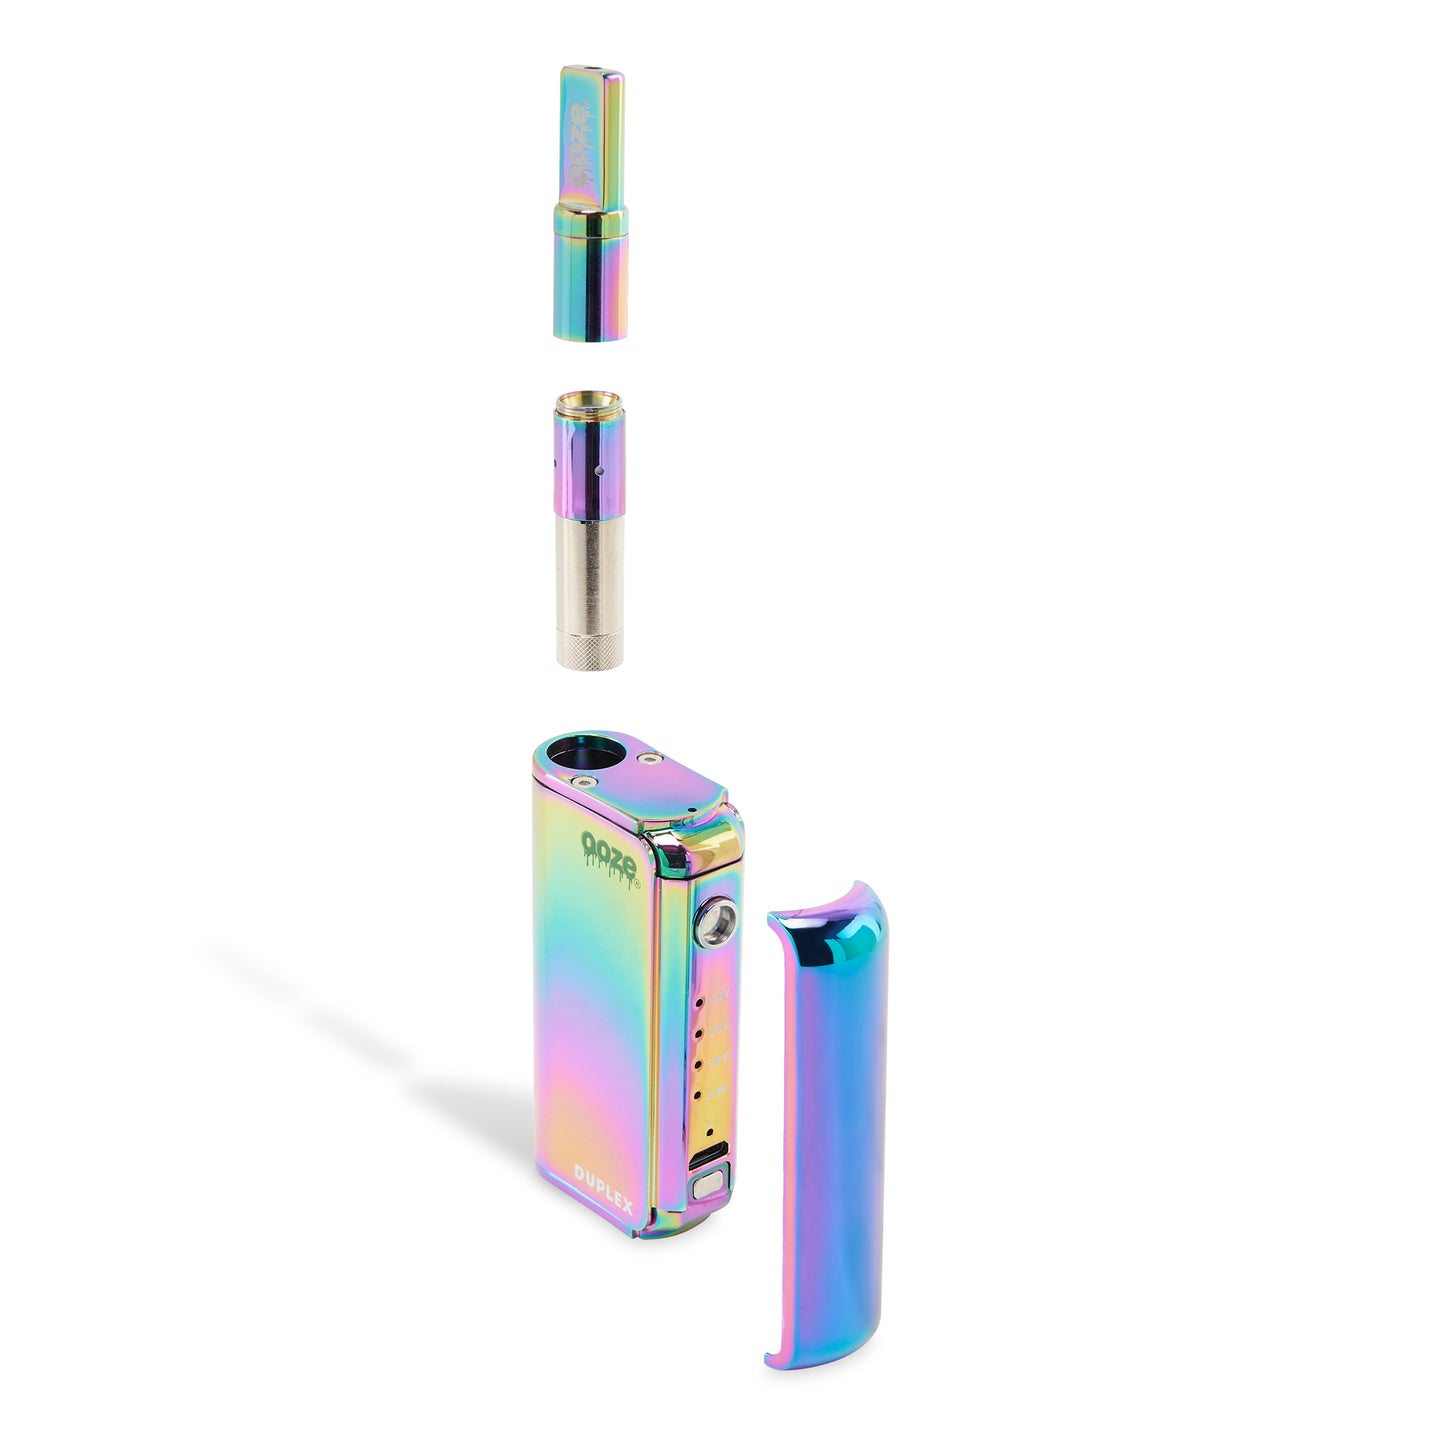 The Rainbow Ooze Duplex Pro Vaporizer is shown disassembled. The wax atomizer and adapter are floating above the chamber and the magnetic button plate is pulled out in front of the device.